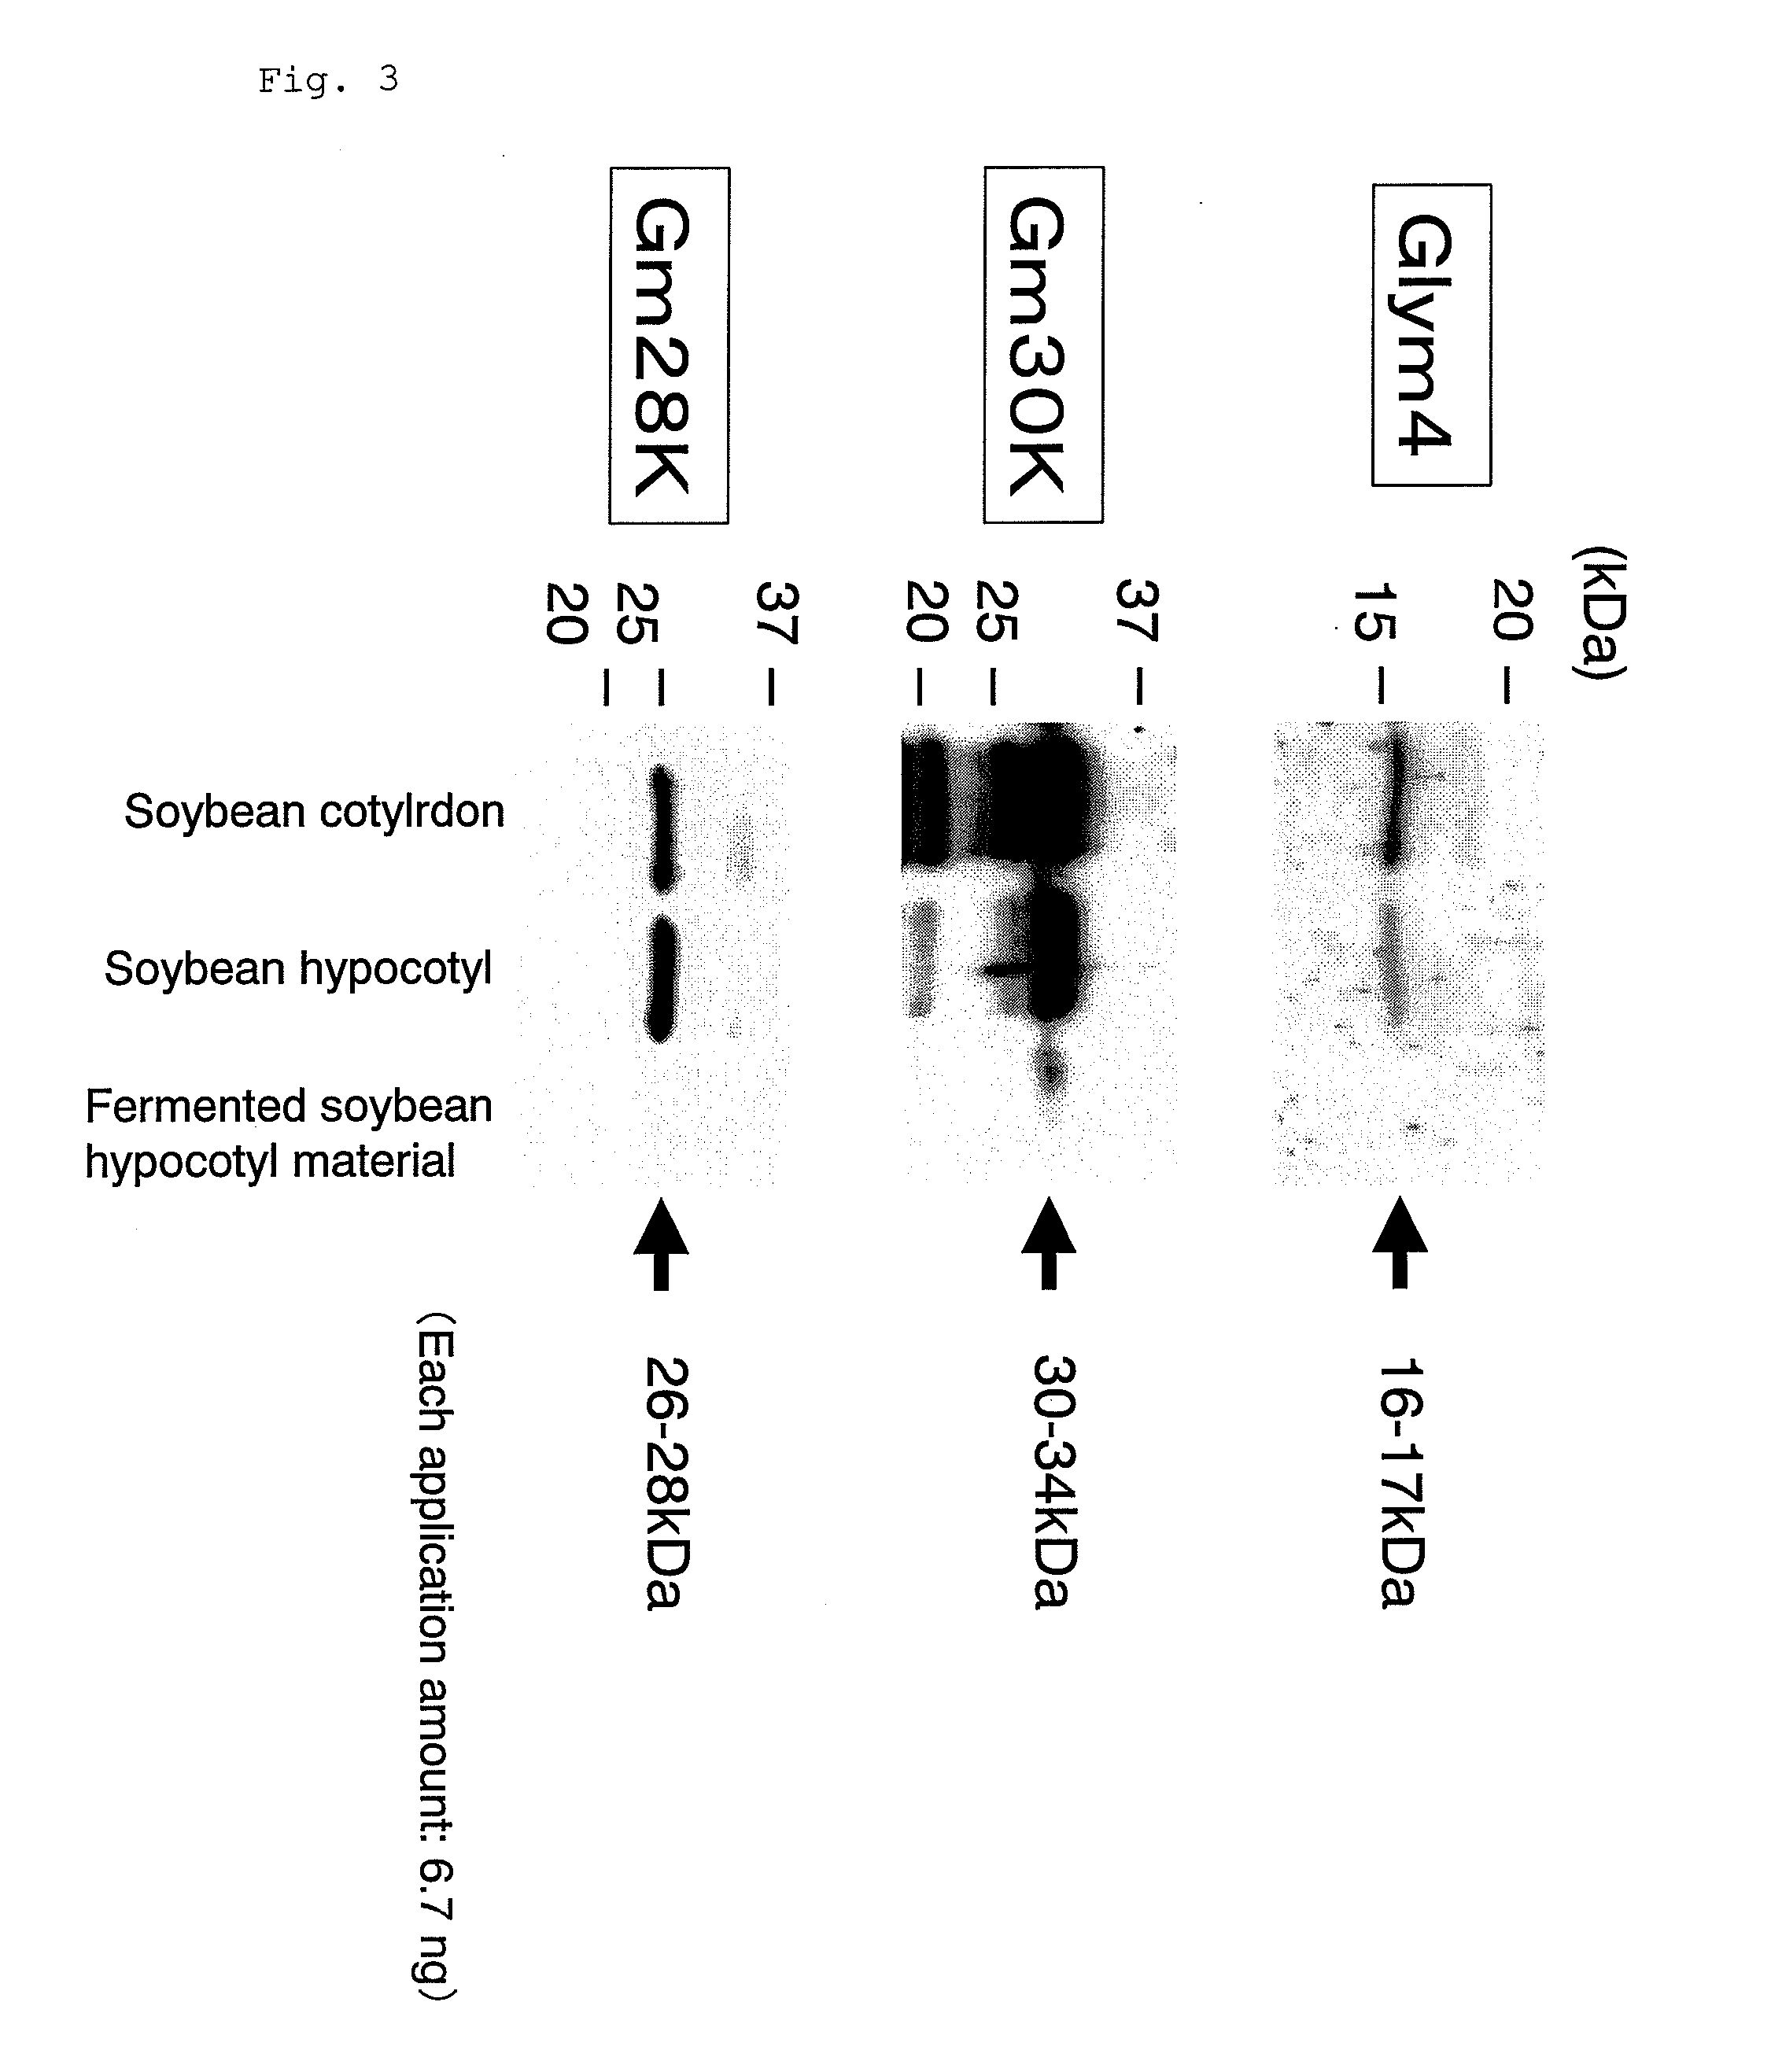 Equal-containing fermentation product of soybean embryonic axis, and method for production thereof